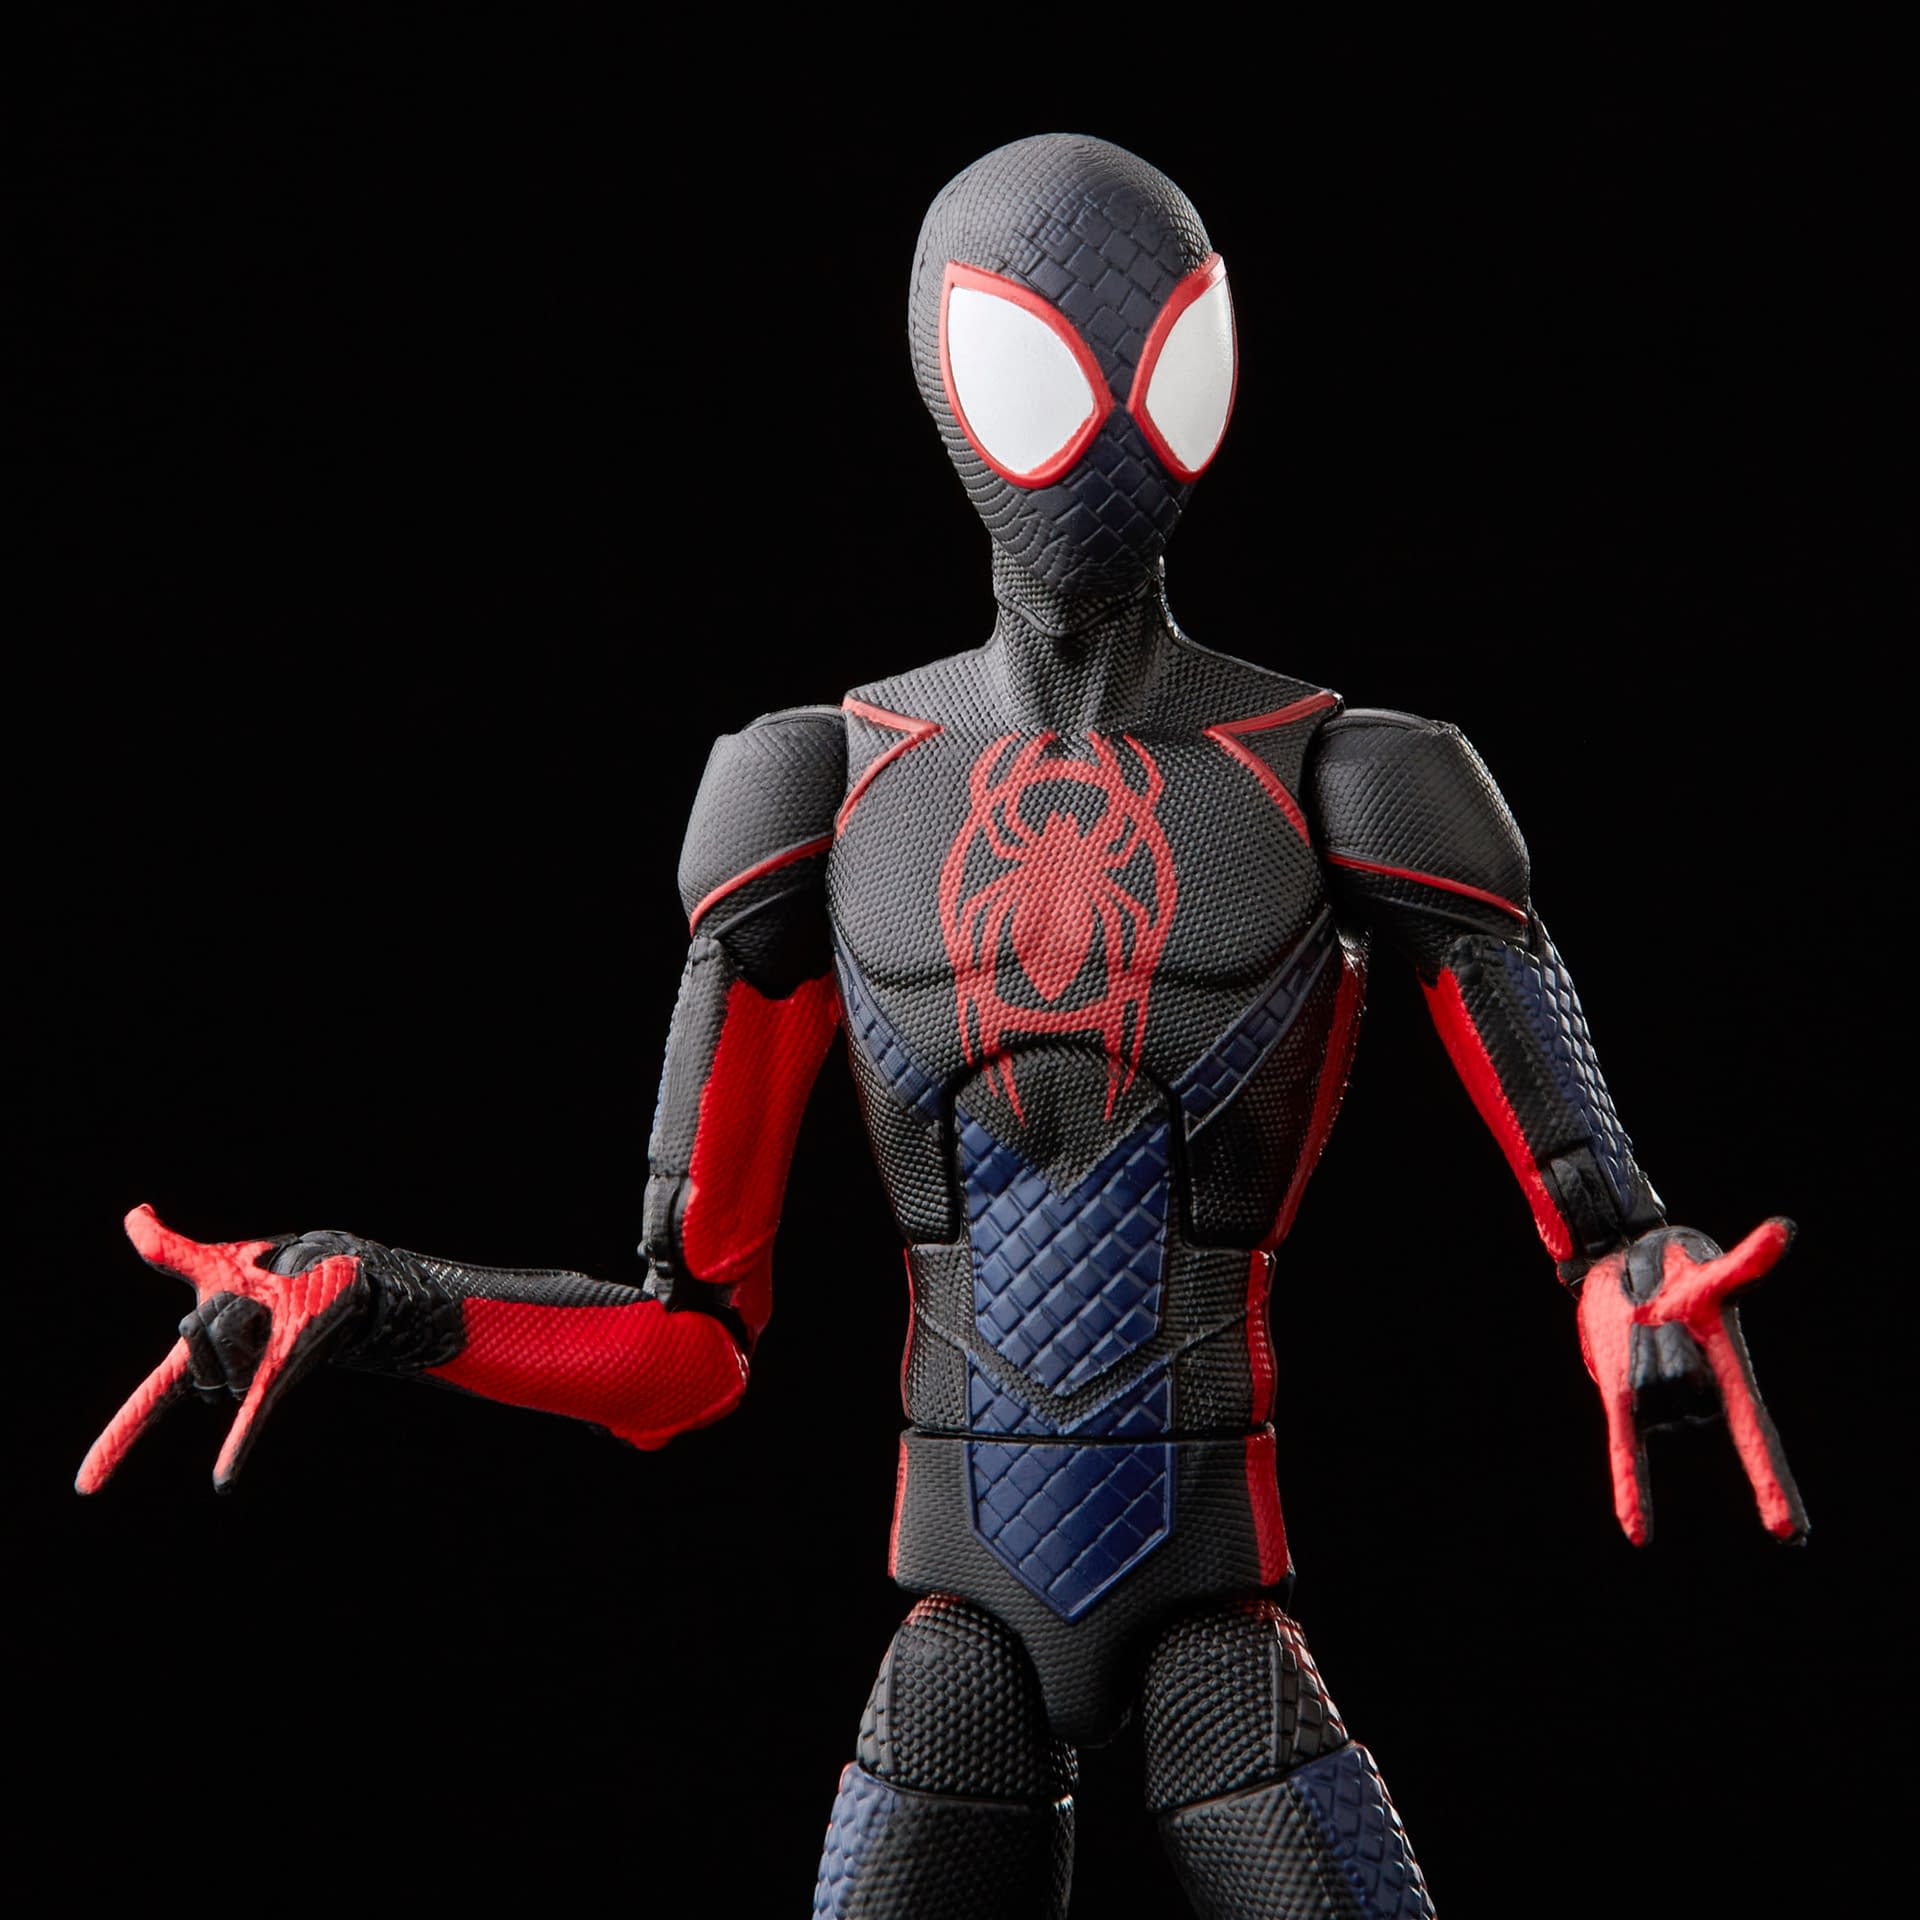 Spider-Man Miles Morales Enters the Spider-Verse with Marvel Legends